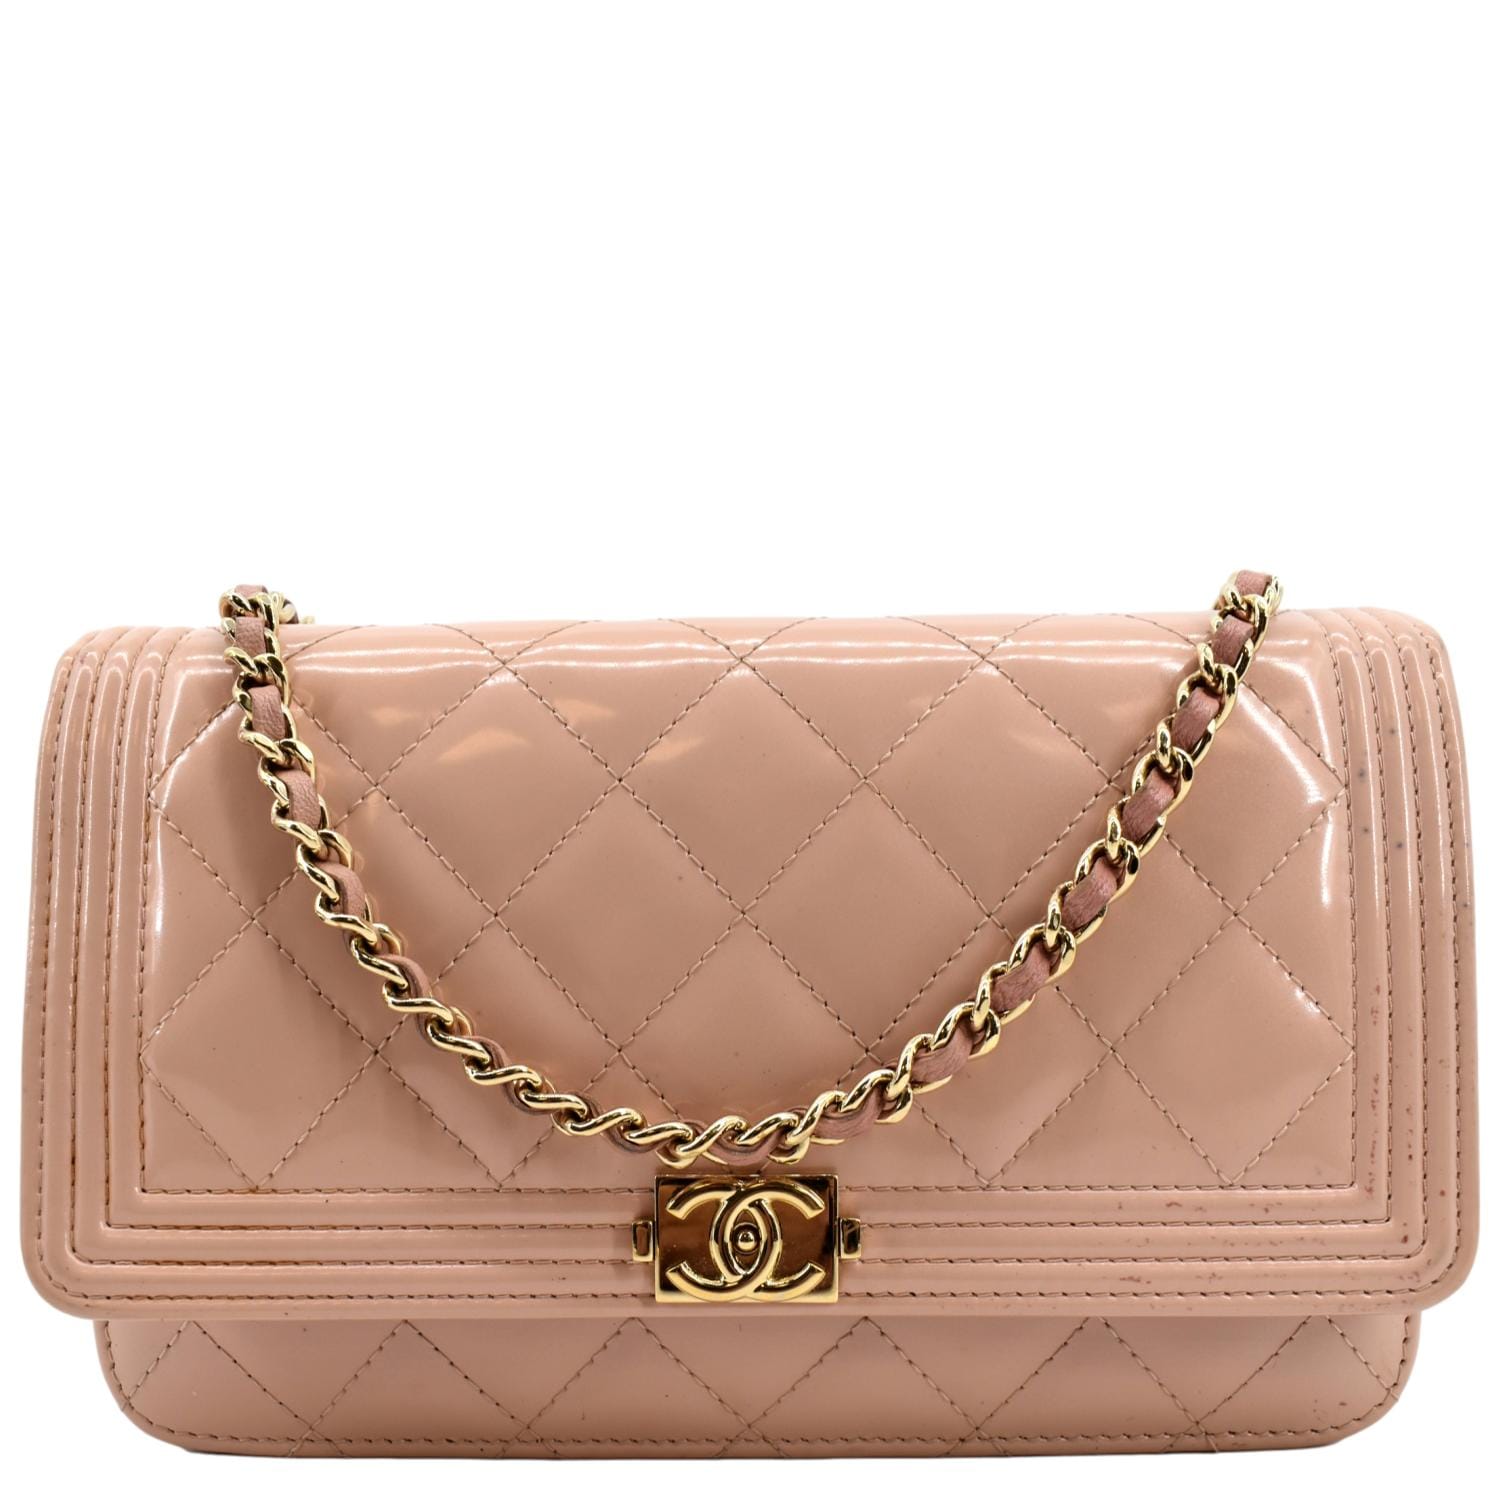 CHANEL Boy Woc Wallet on Chain Patent Leather Shoulder Bag Pink